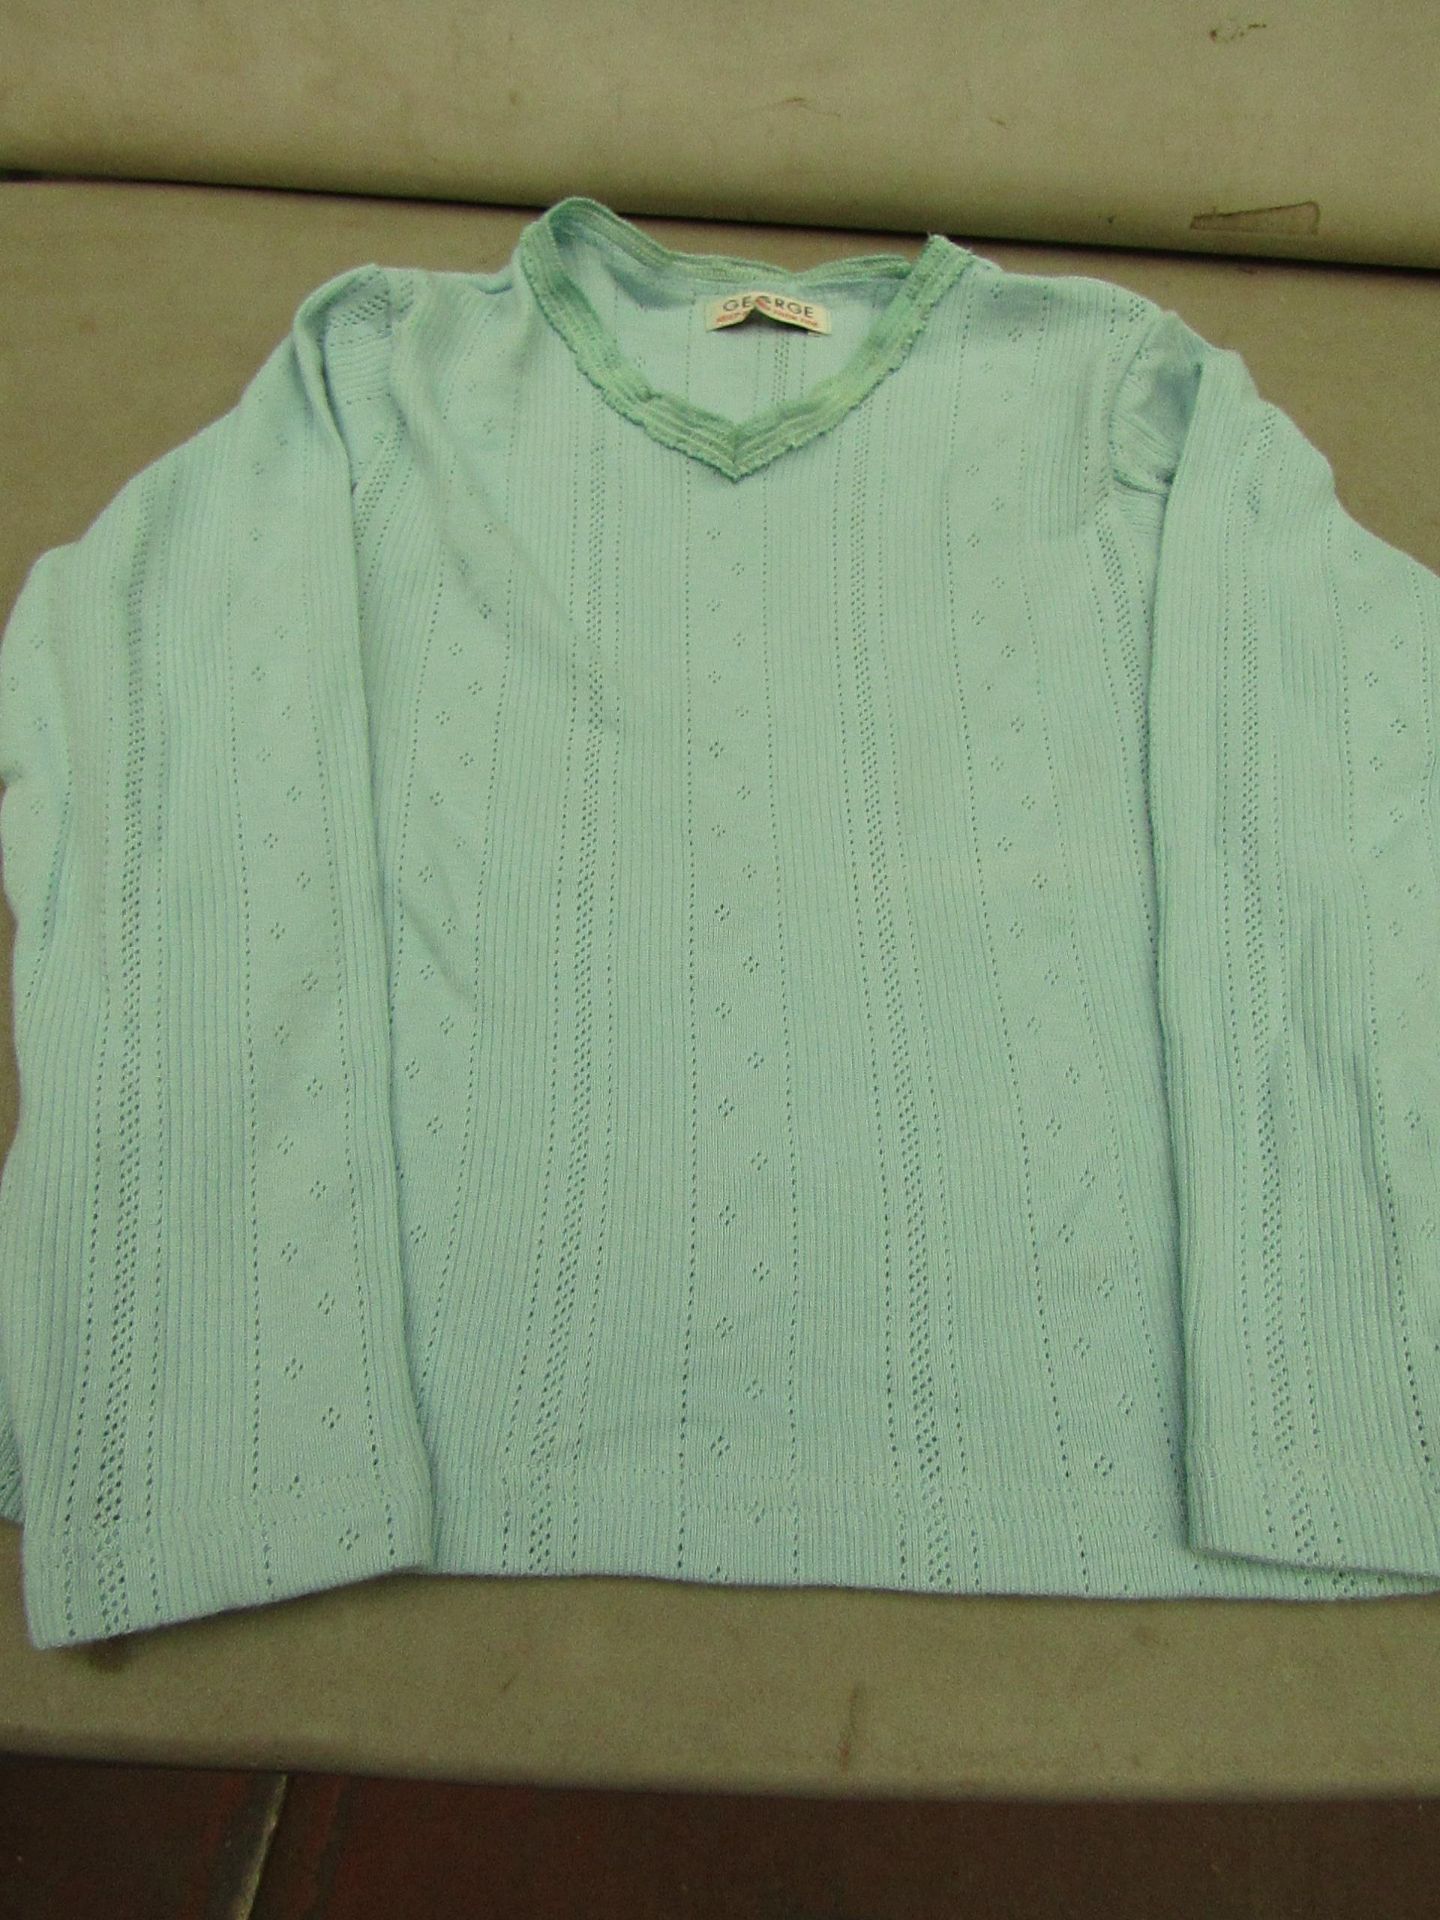 1 x pack of 10 George - Light Blue Children's Long Sleeved T-Shirts Size 4 - 5 Years - New